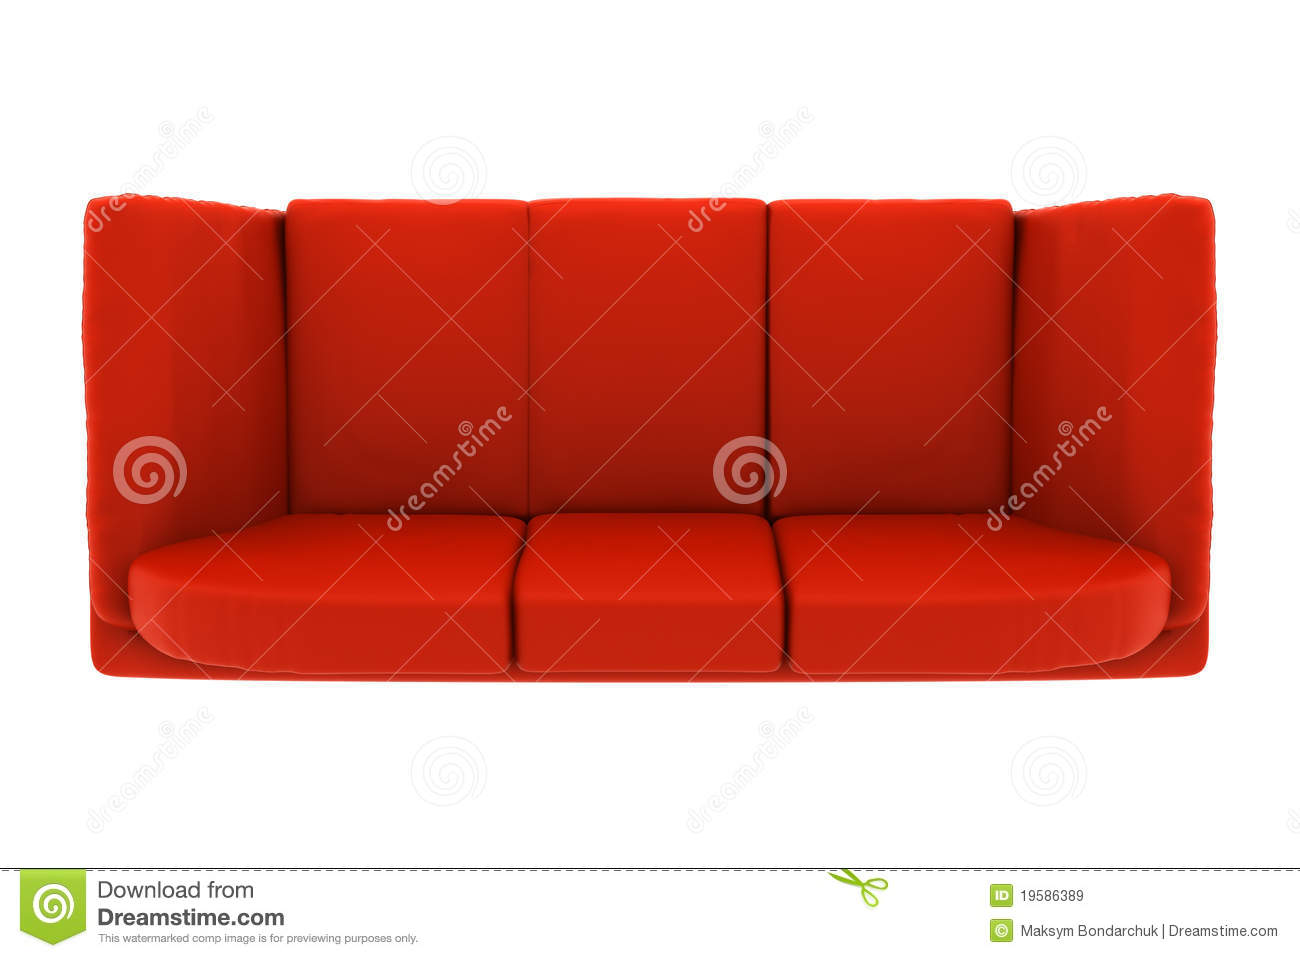 Royalty Free Stock Images  Red Leather Couch Isolated On White  Top